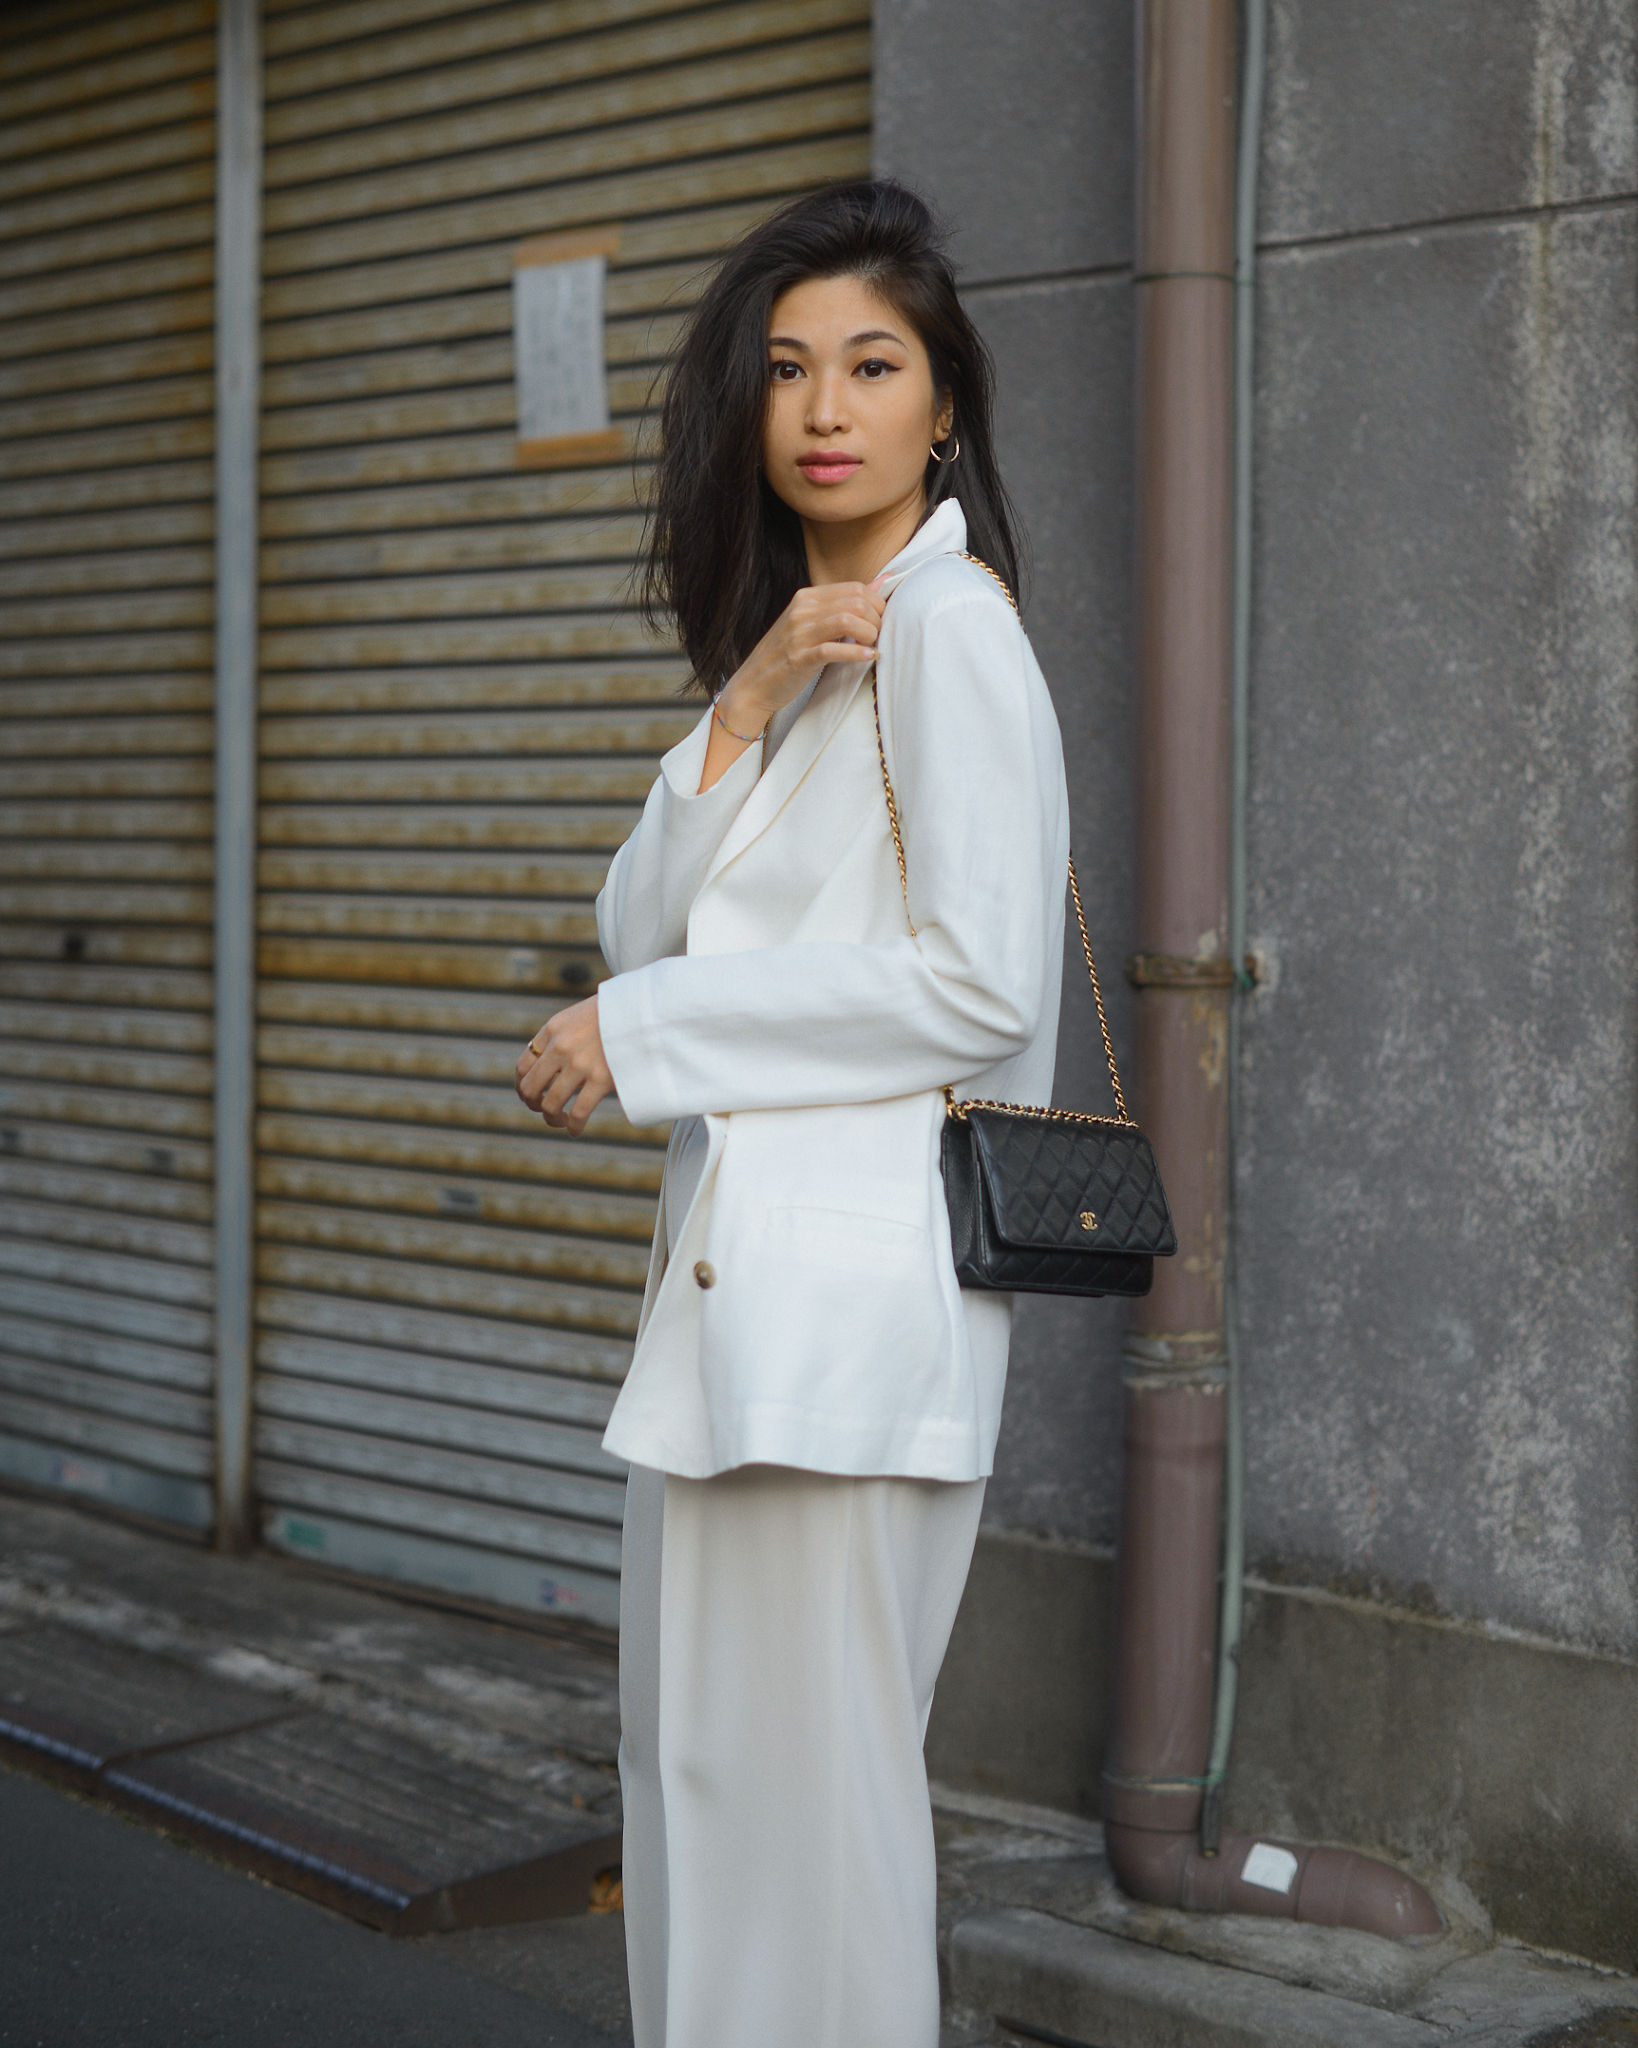 Winter white outfit ideas, styling white wide leg trousers, simple outfit ideas with white blazer, wide leg trousers and sneakers / FOREVERVANNY by Van Le